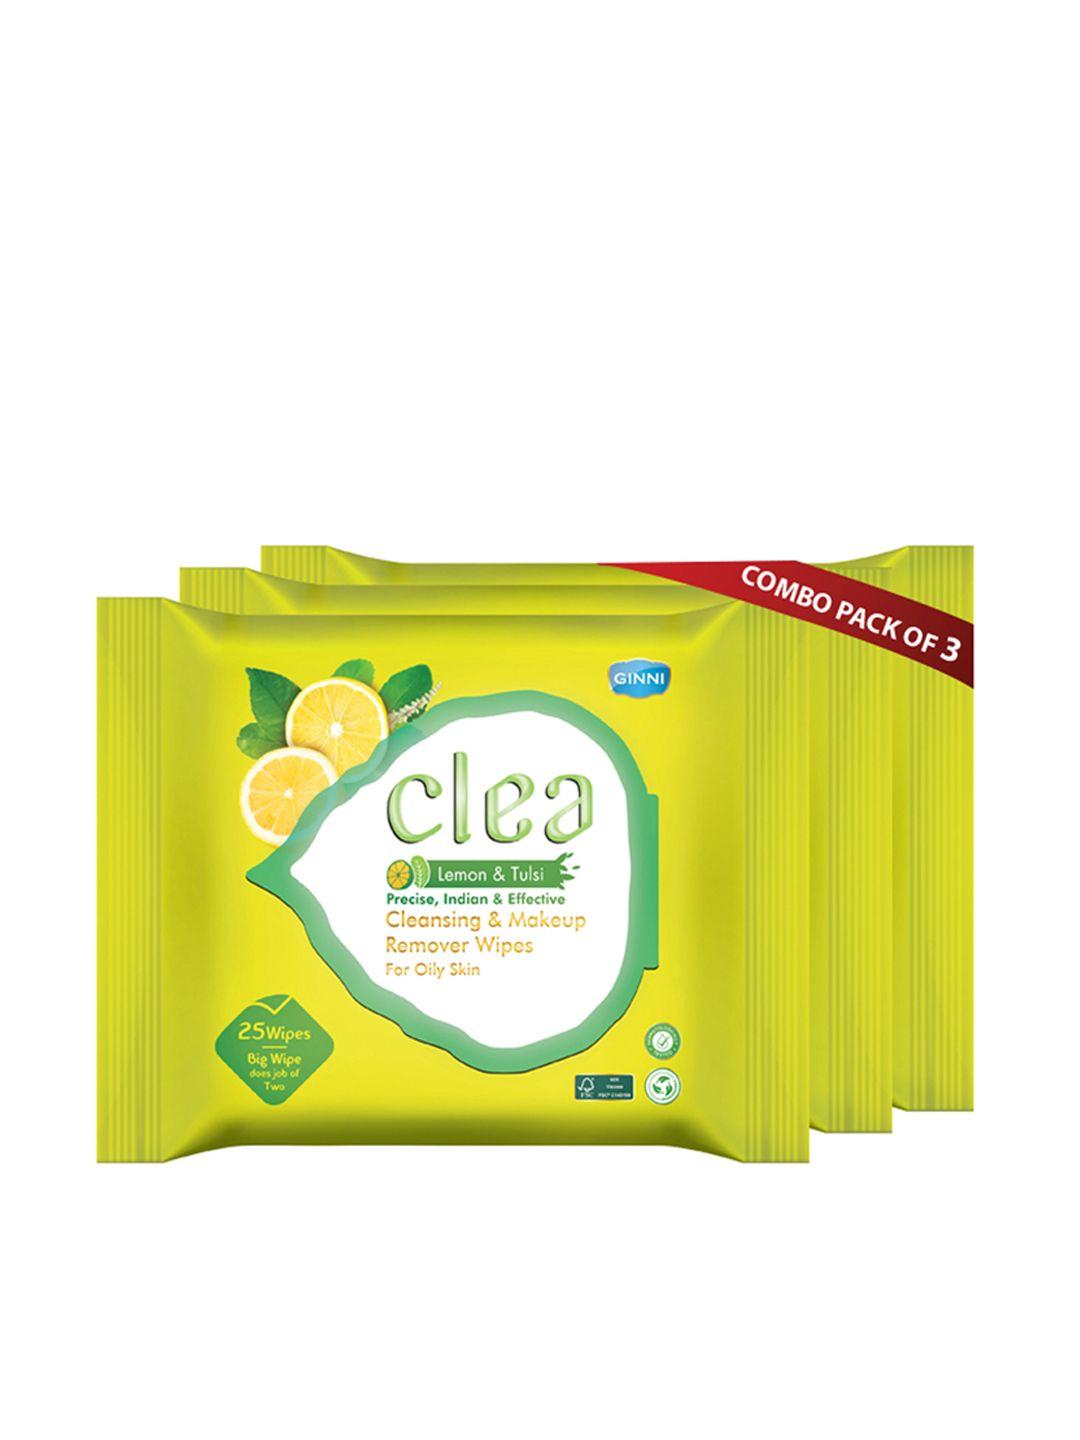 clea set of 3 lemon & tulsi cleansing & makeup remover wet wipes - 25 pulls each